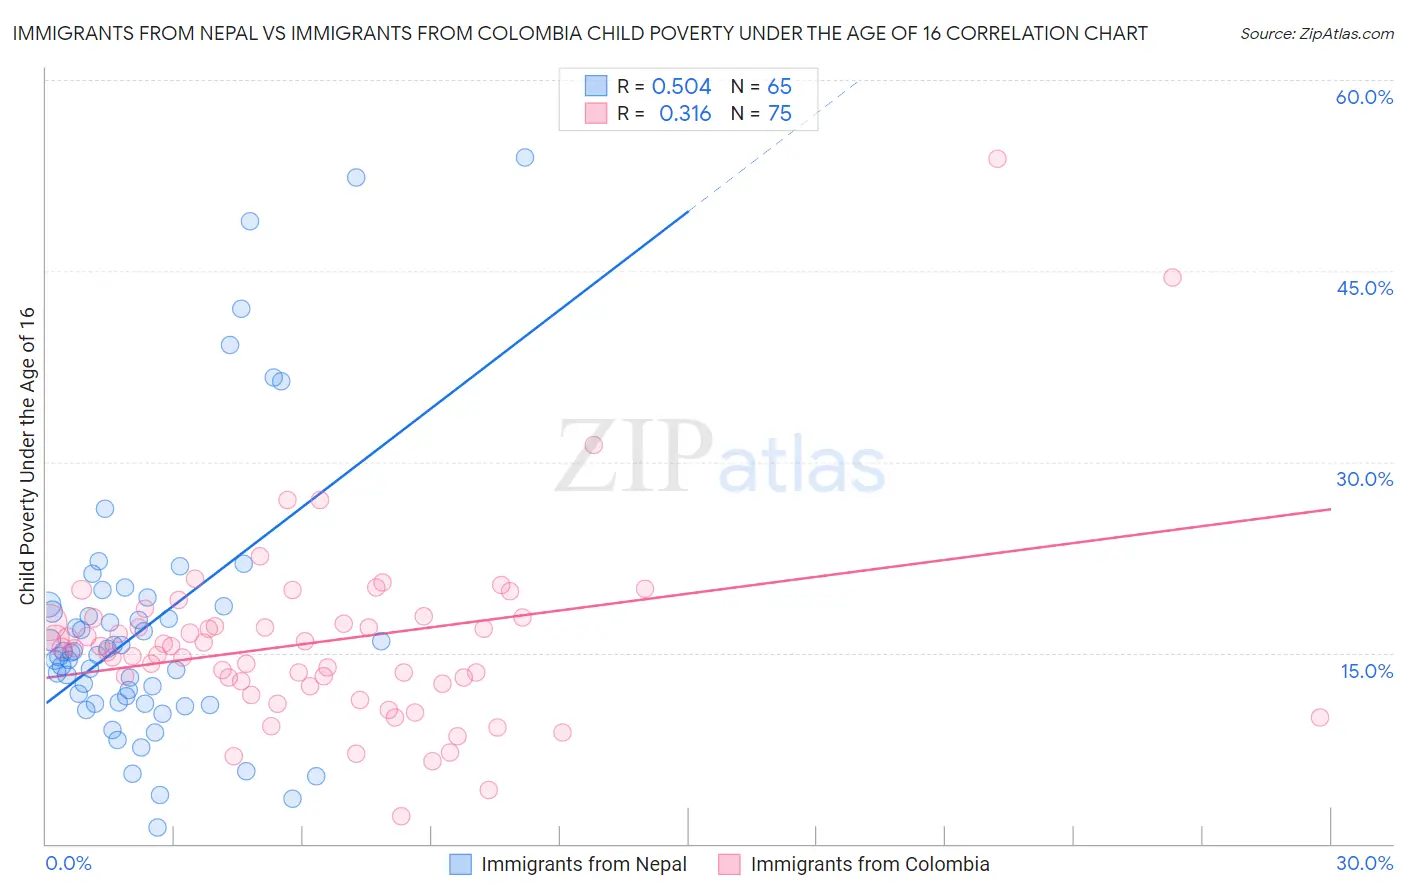 Immigrants from Nepal vs Immigrants from Colombia Child Poverty Under the Age of 16